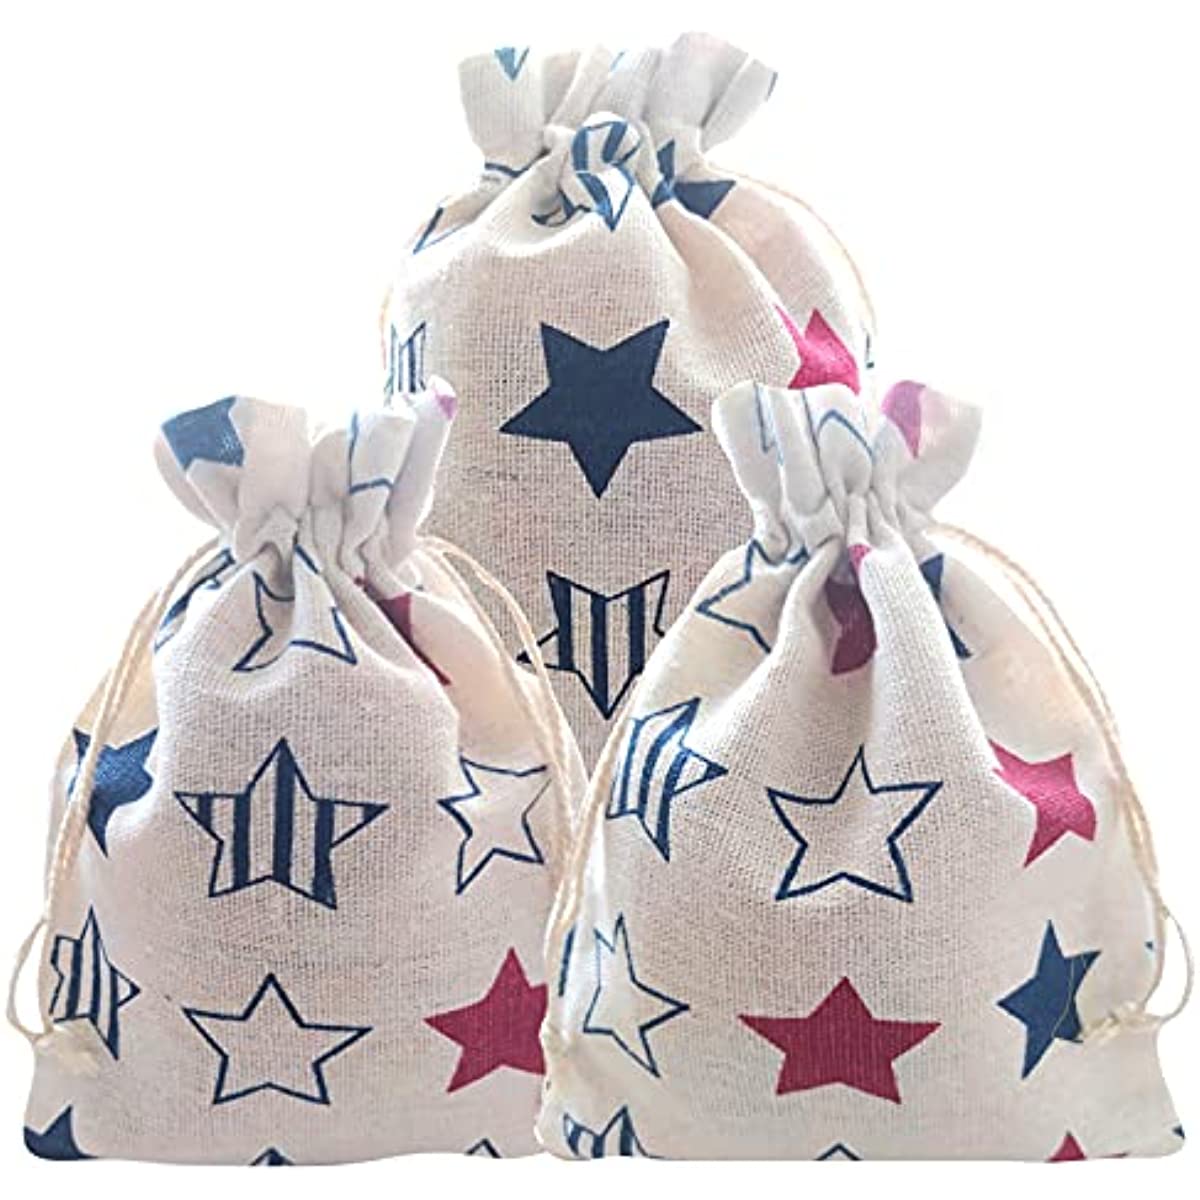 Pajean 16 Pieces Patriotic Thank You Gift Bags with 18 Red White Blue  Tissue Paper American Flag Party Favor USA Treat Goodie Handle for Veterans  Day